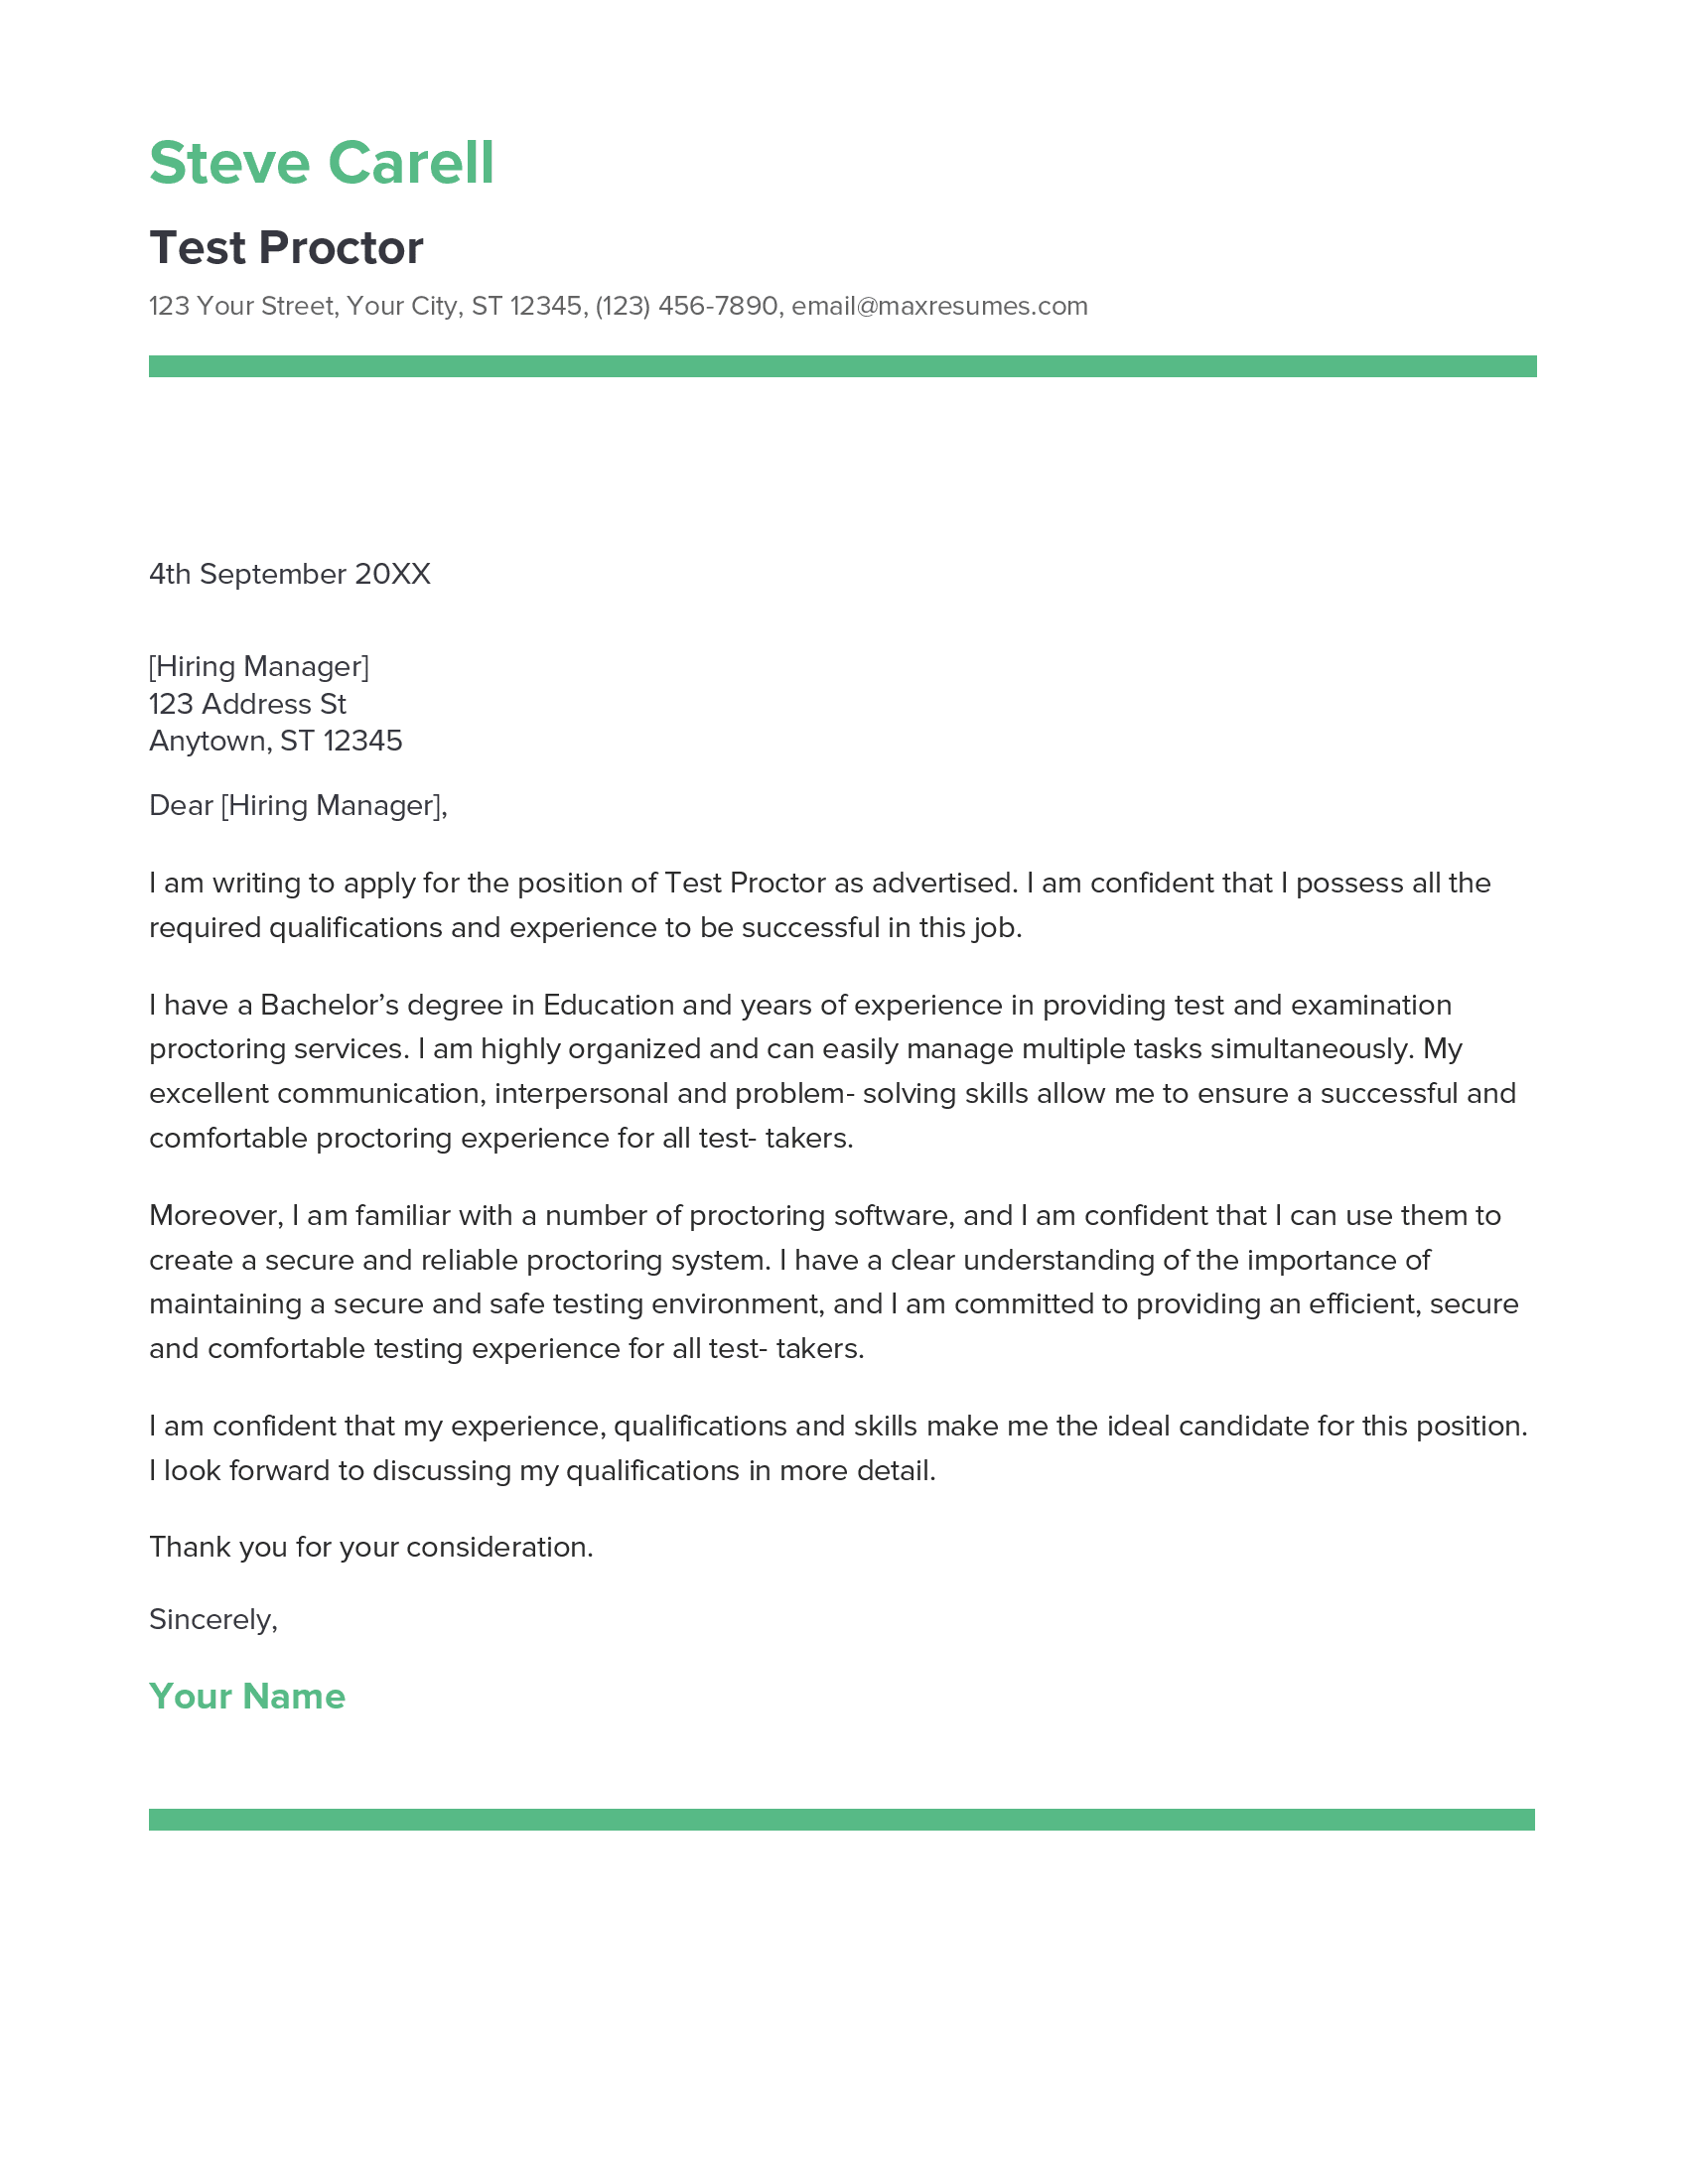 Test Proctor Cover Letter Example